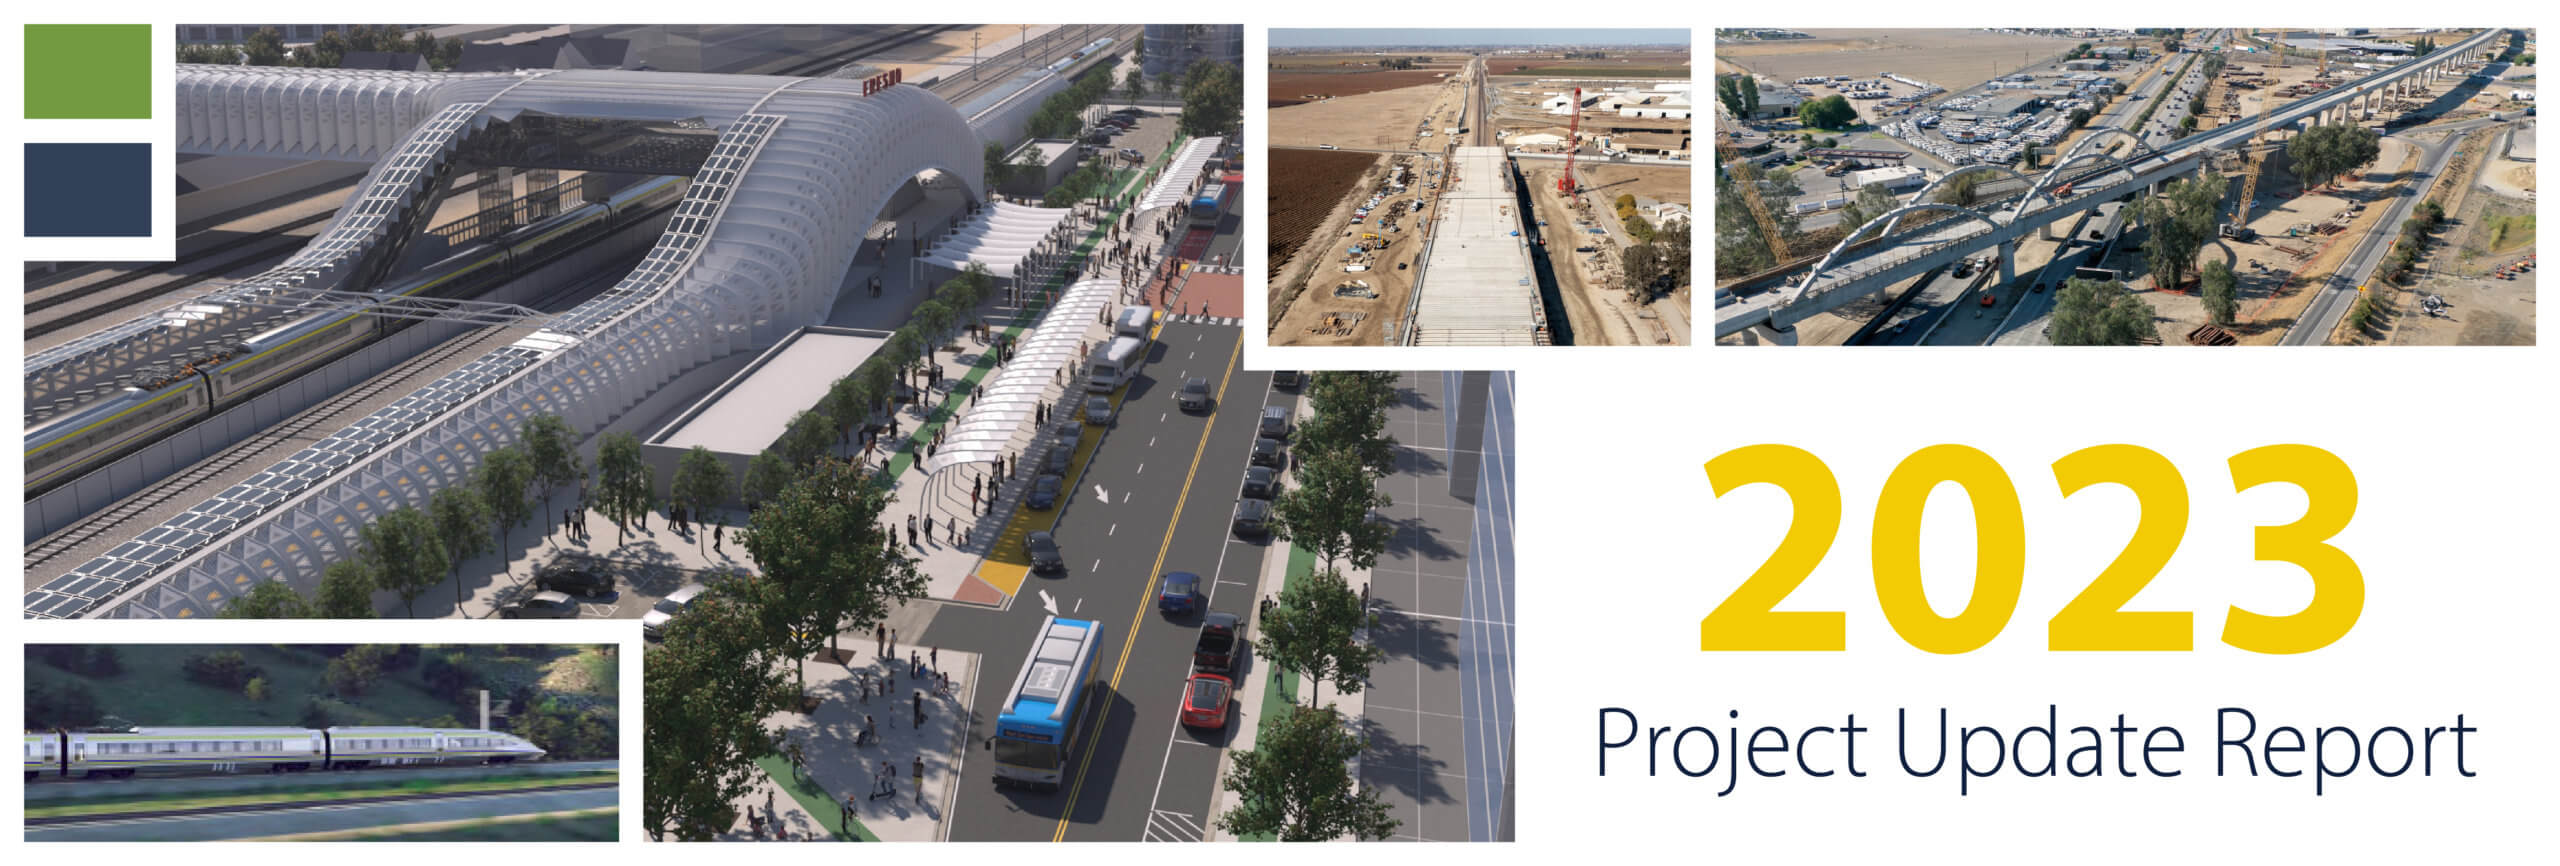 2023 Project Update Report title with images of train and station renderings, construction and arched structure